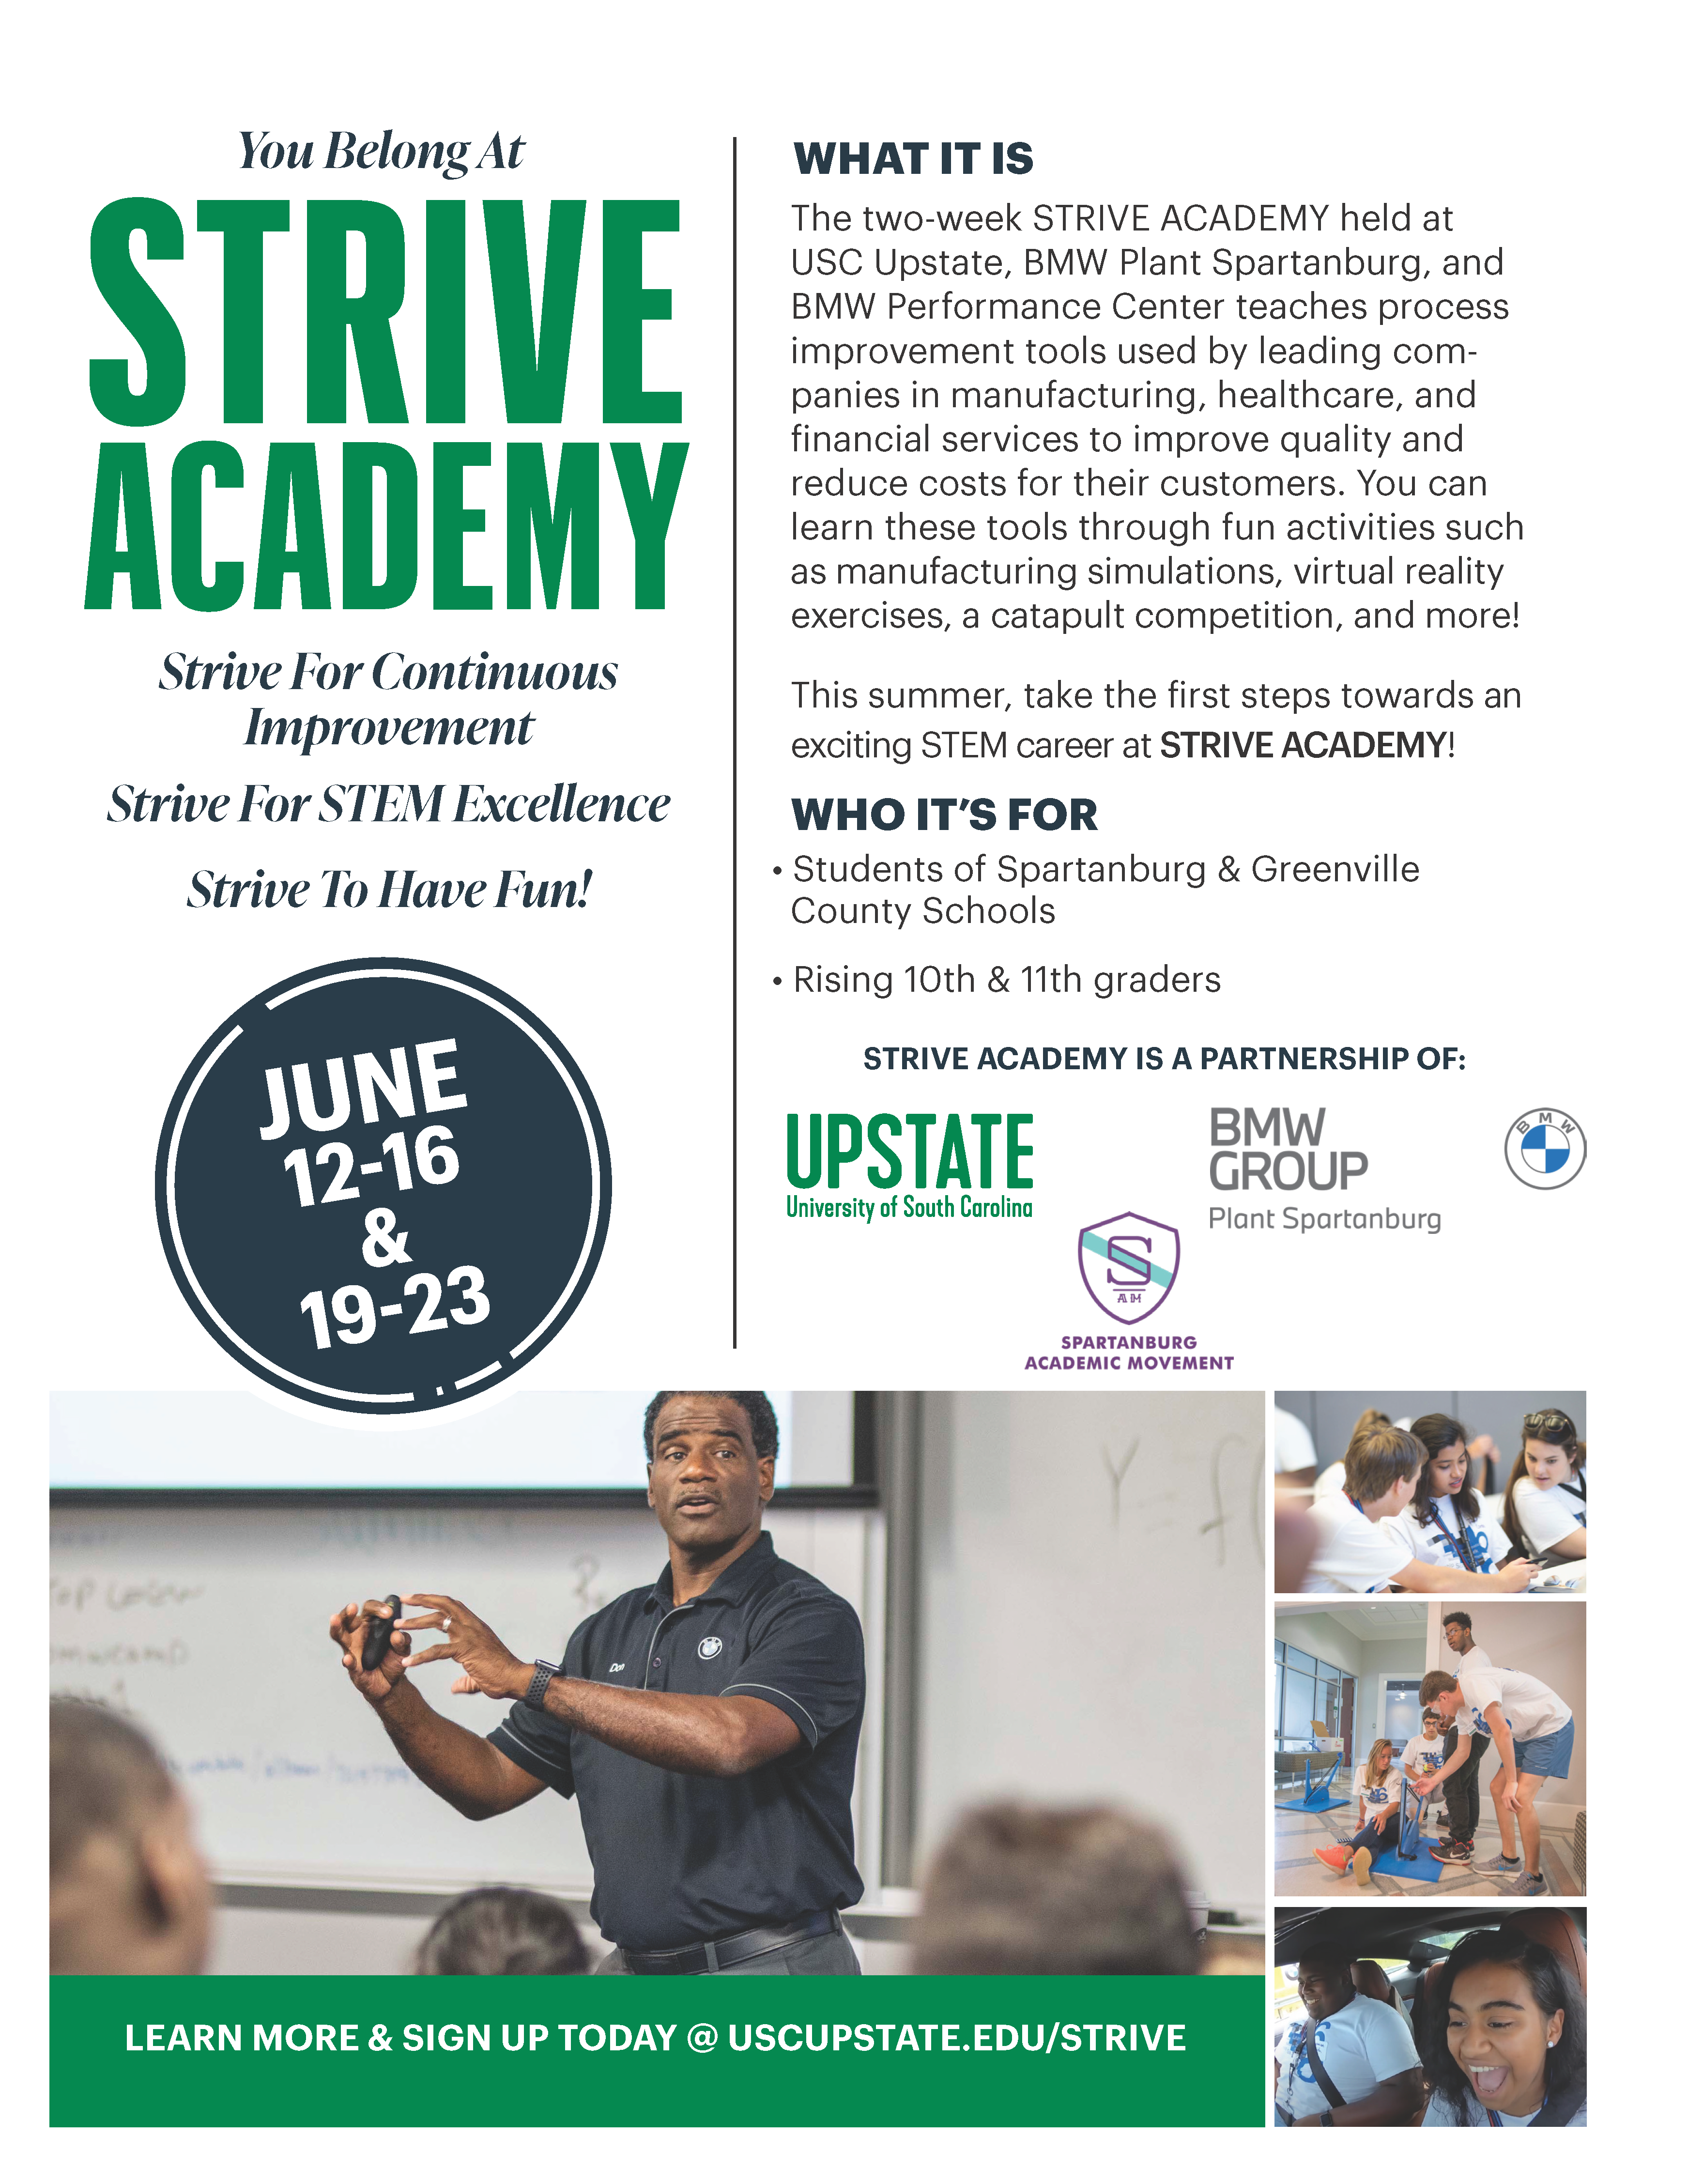 email amyles@spartanburg3.org for strive academy information